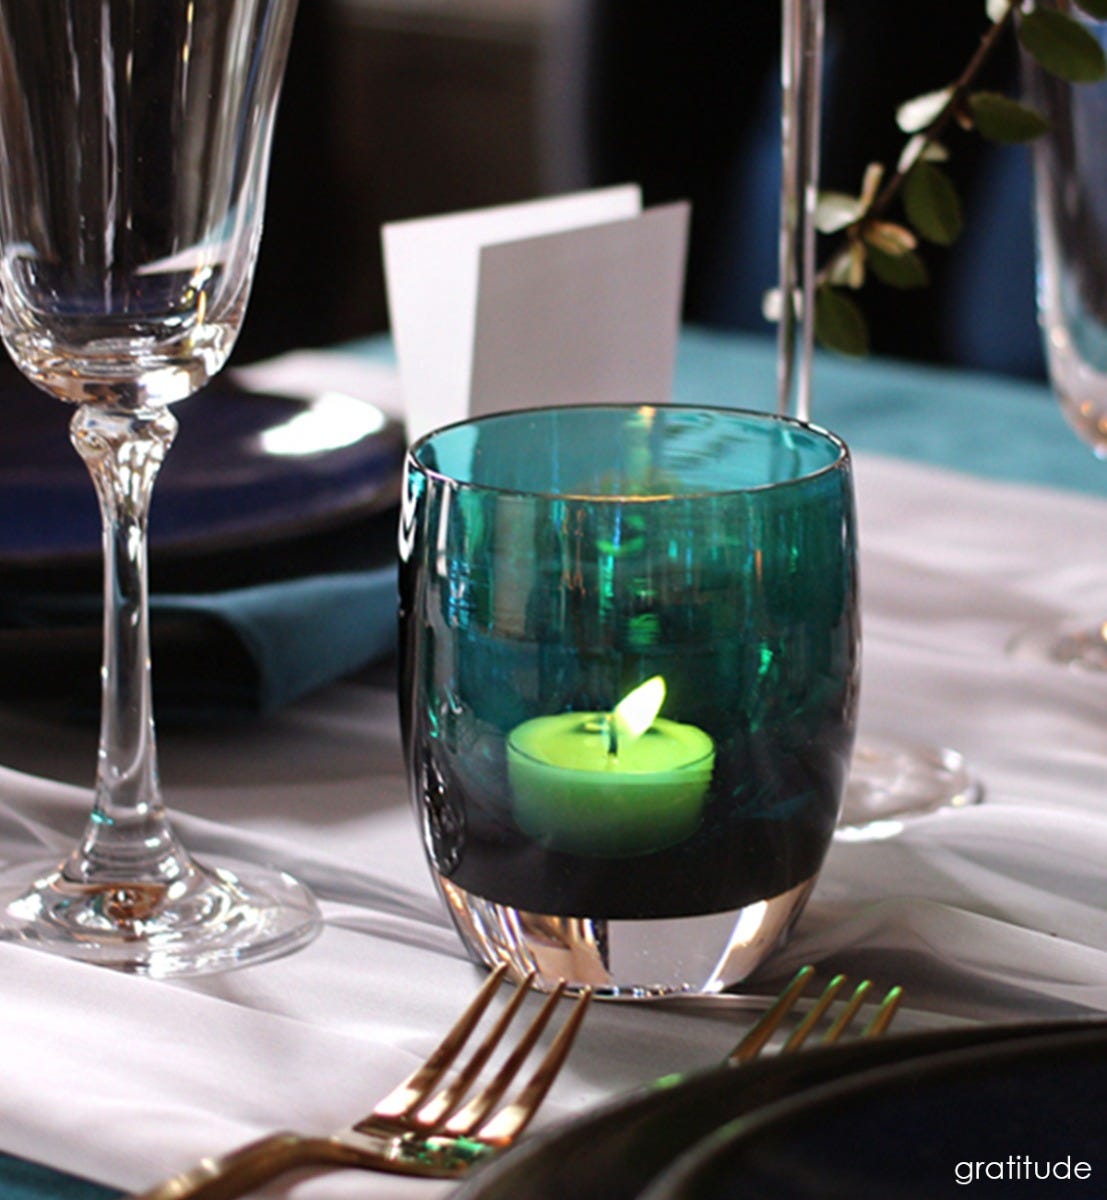 teal with silver metallic interior glass votive candle holder.